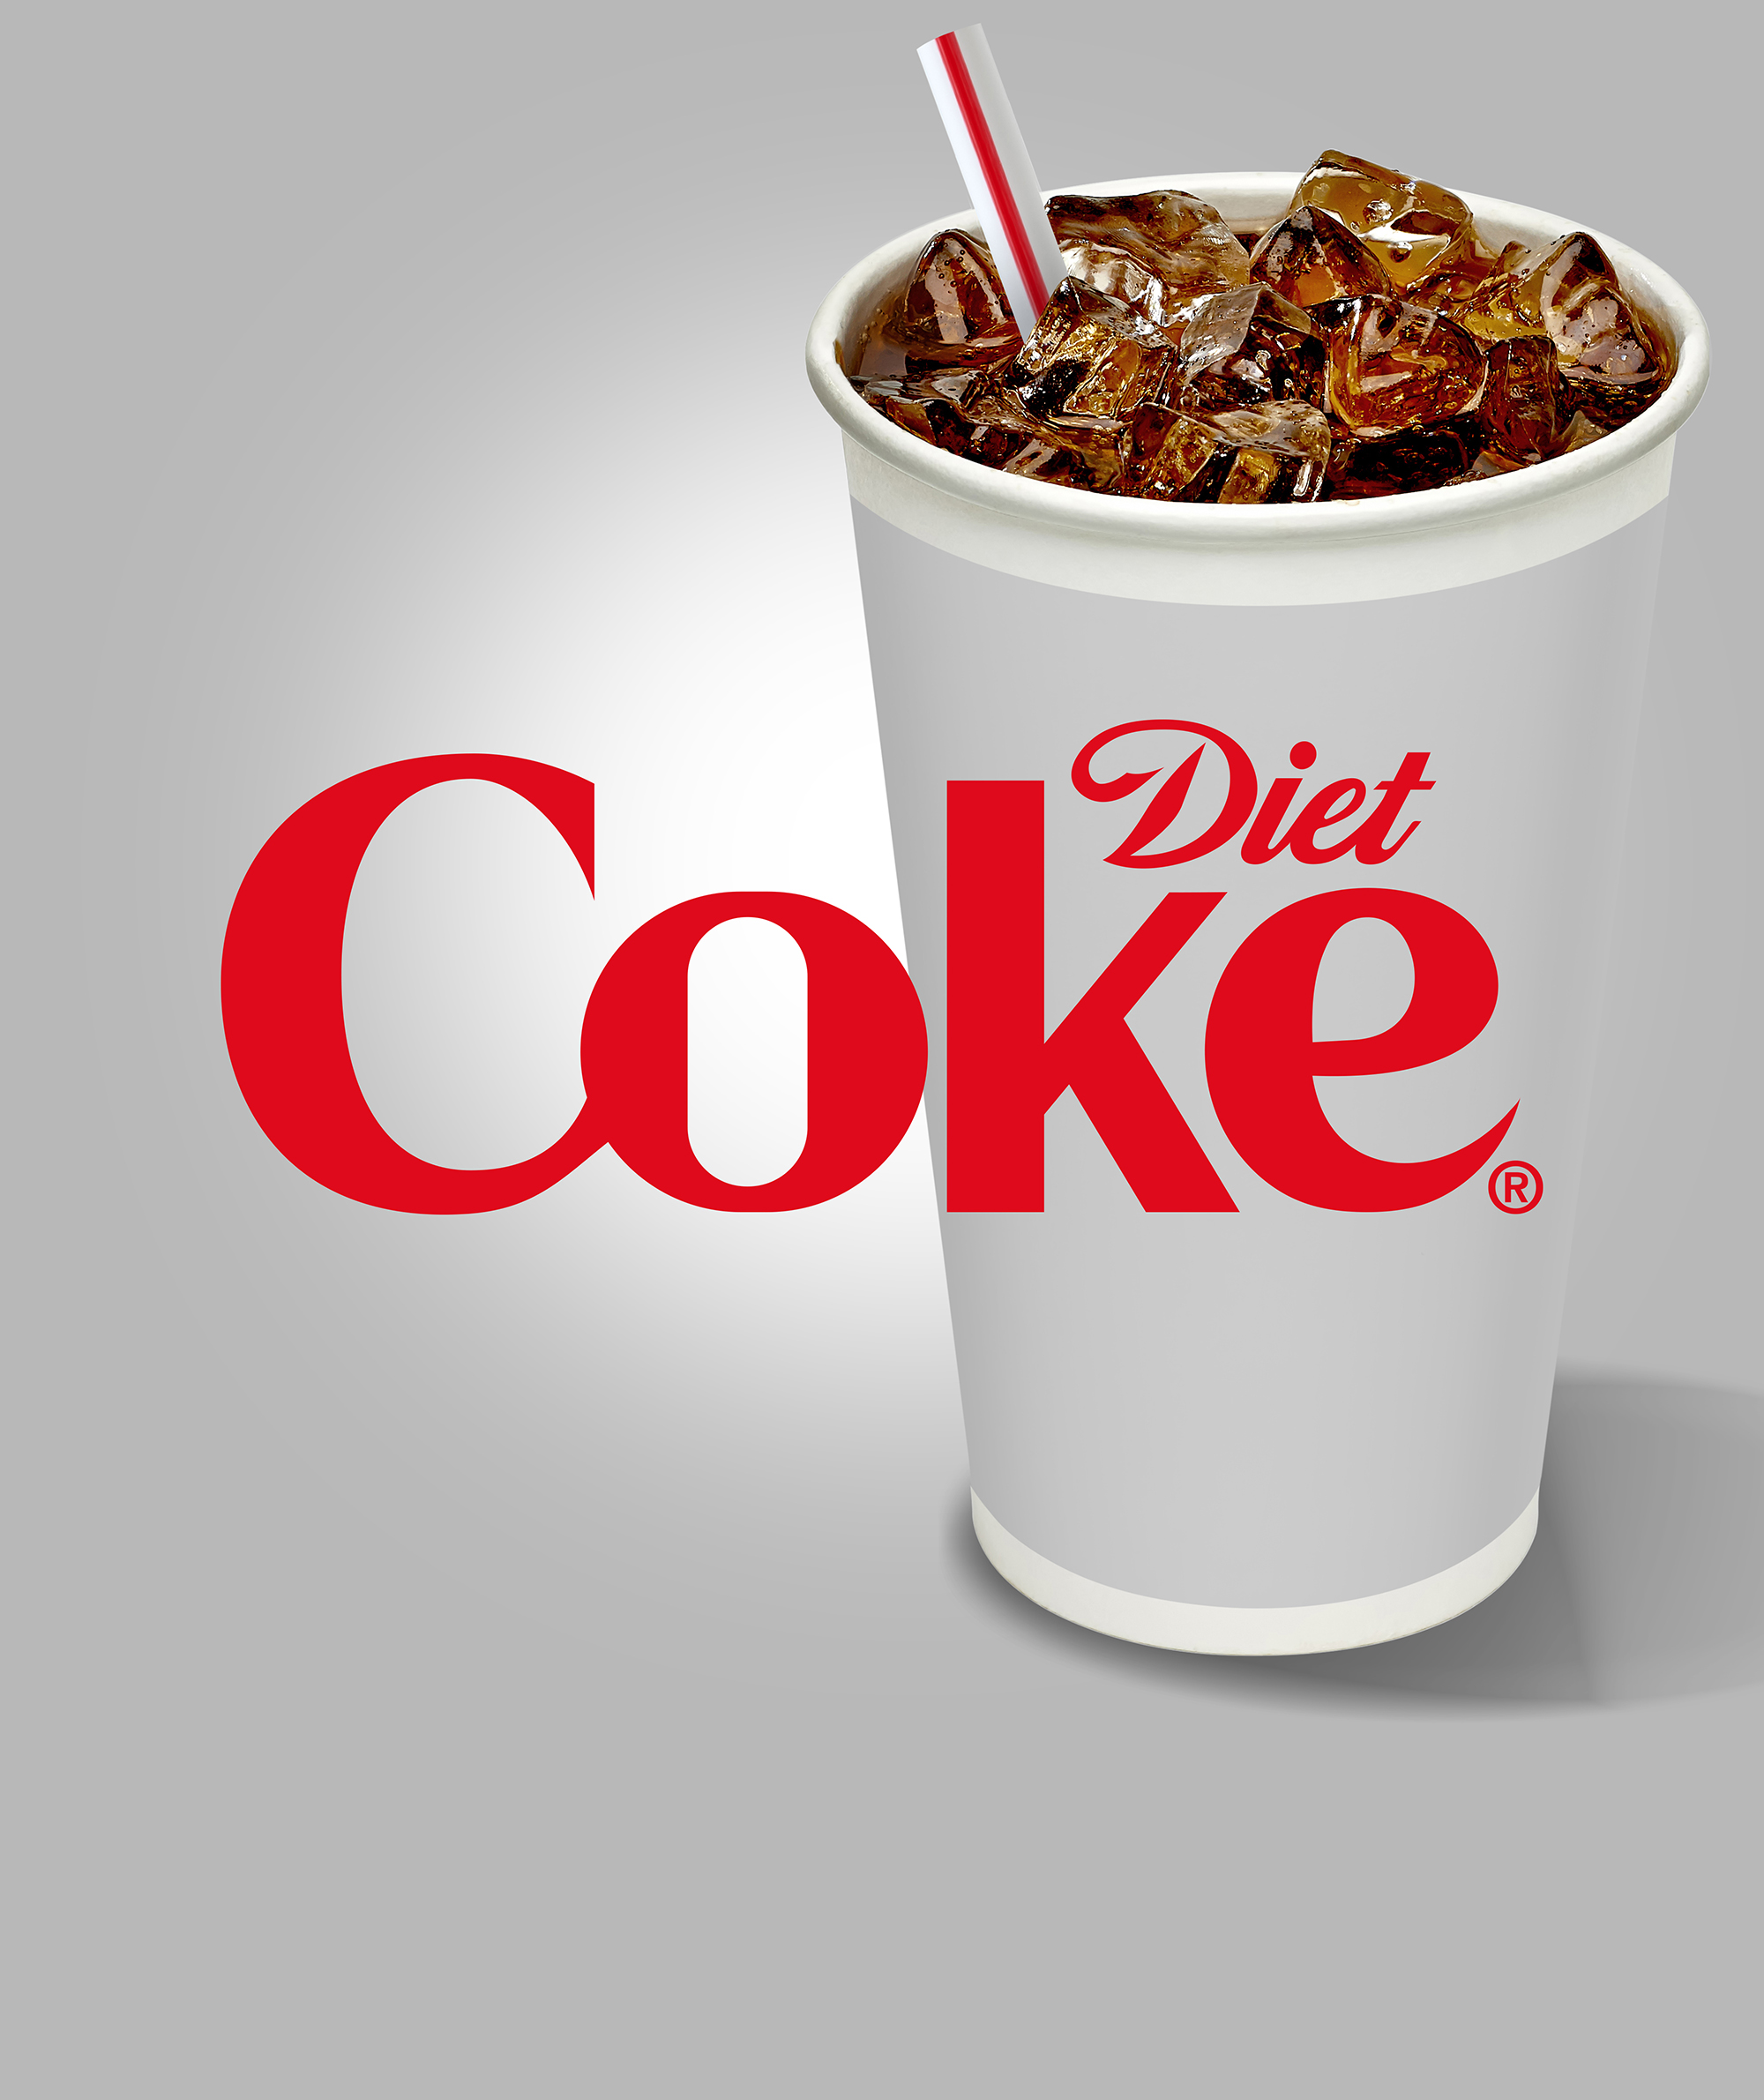 Flavor Smart Nationally Branded Products - Diet Coke